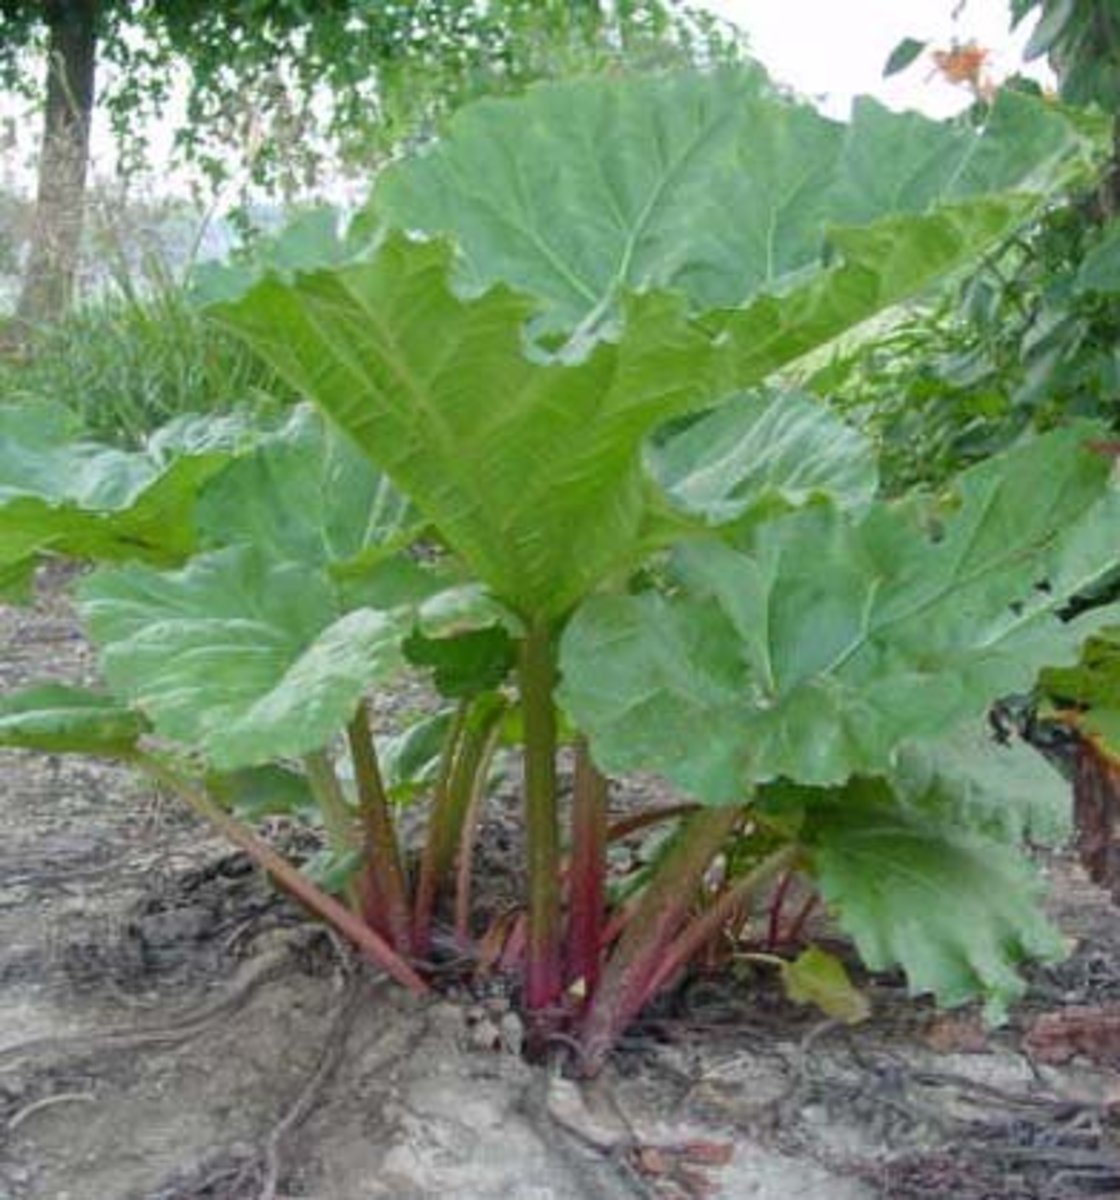 A typical rhubarb plant. These plants need virtually no cultivation, and small care once they are established.